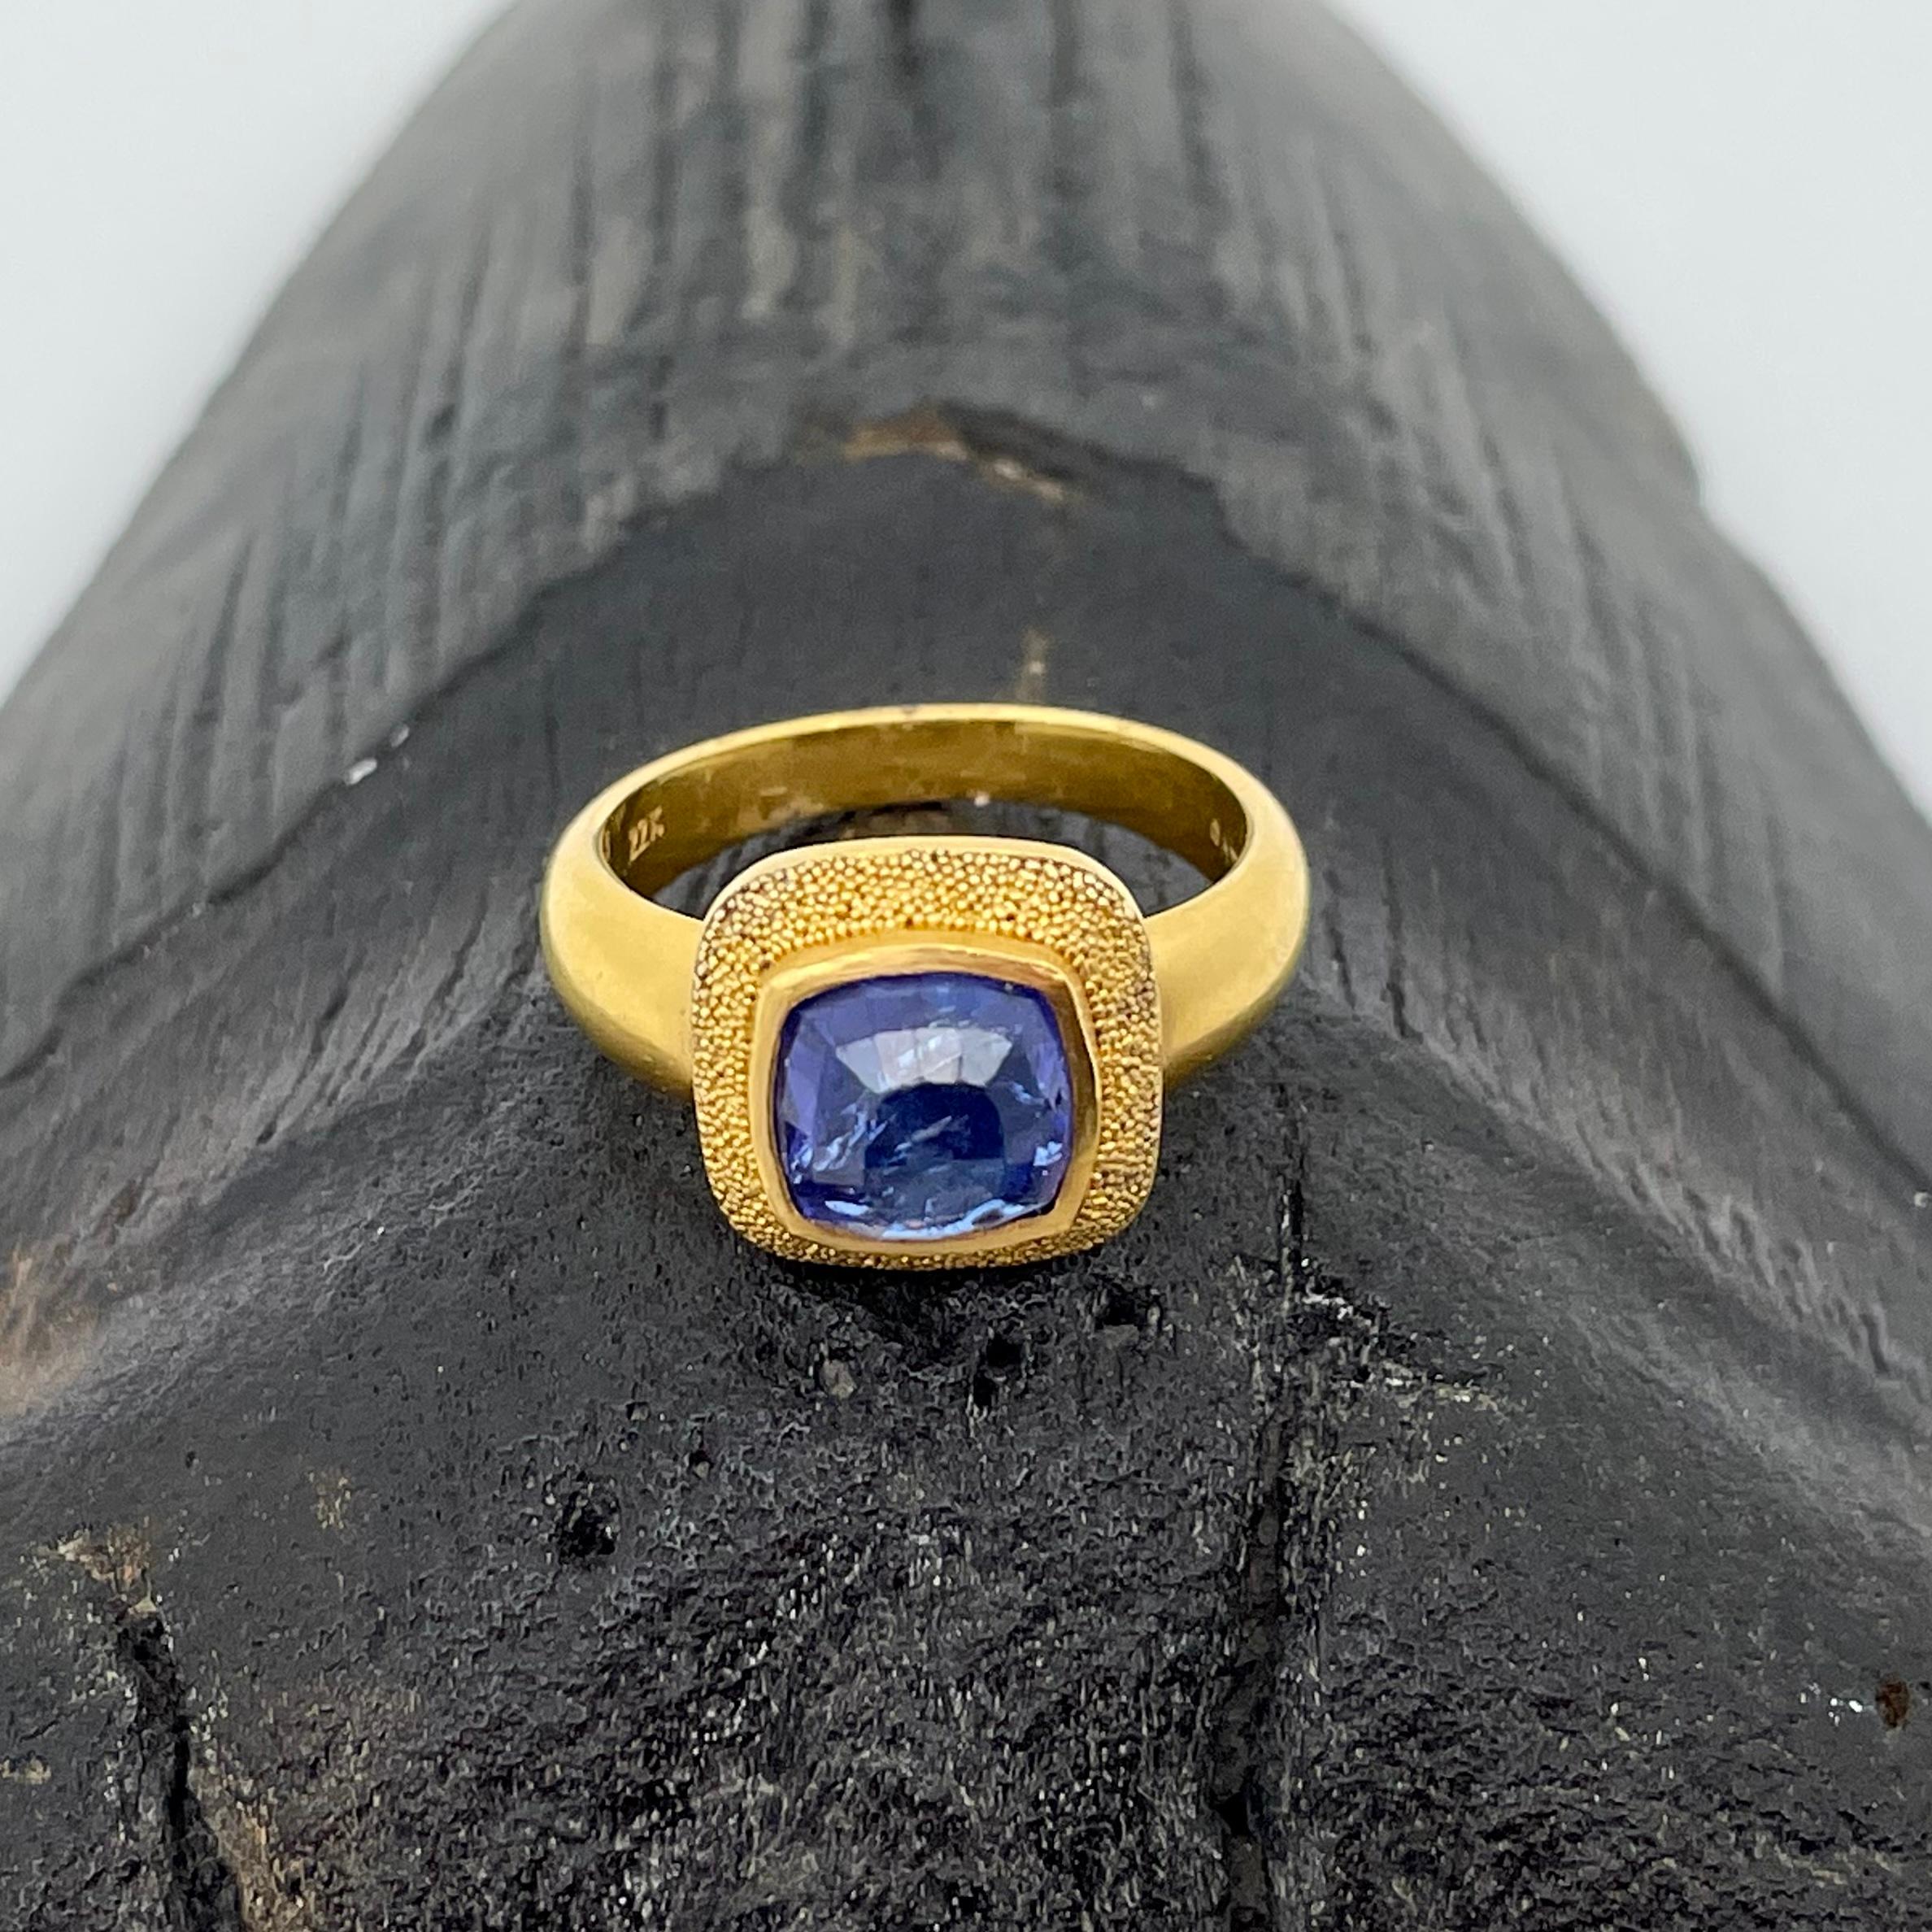 A deep purple-blue high grade rose-cut 7 mm Tanzanite pyramid is spectacular surrounded by rich 